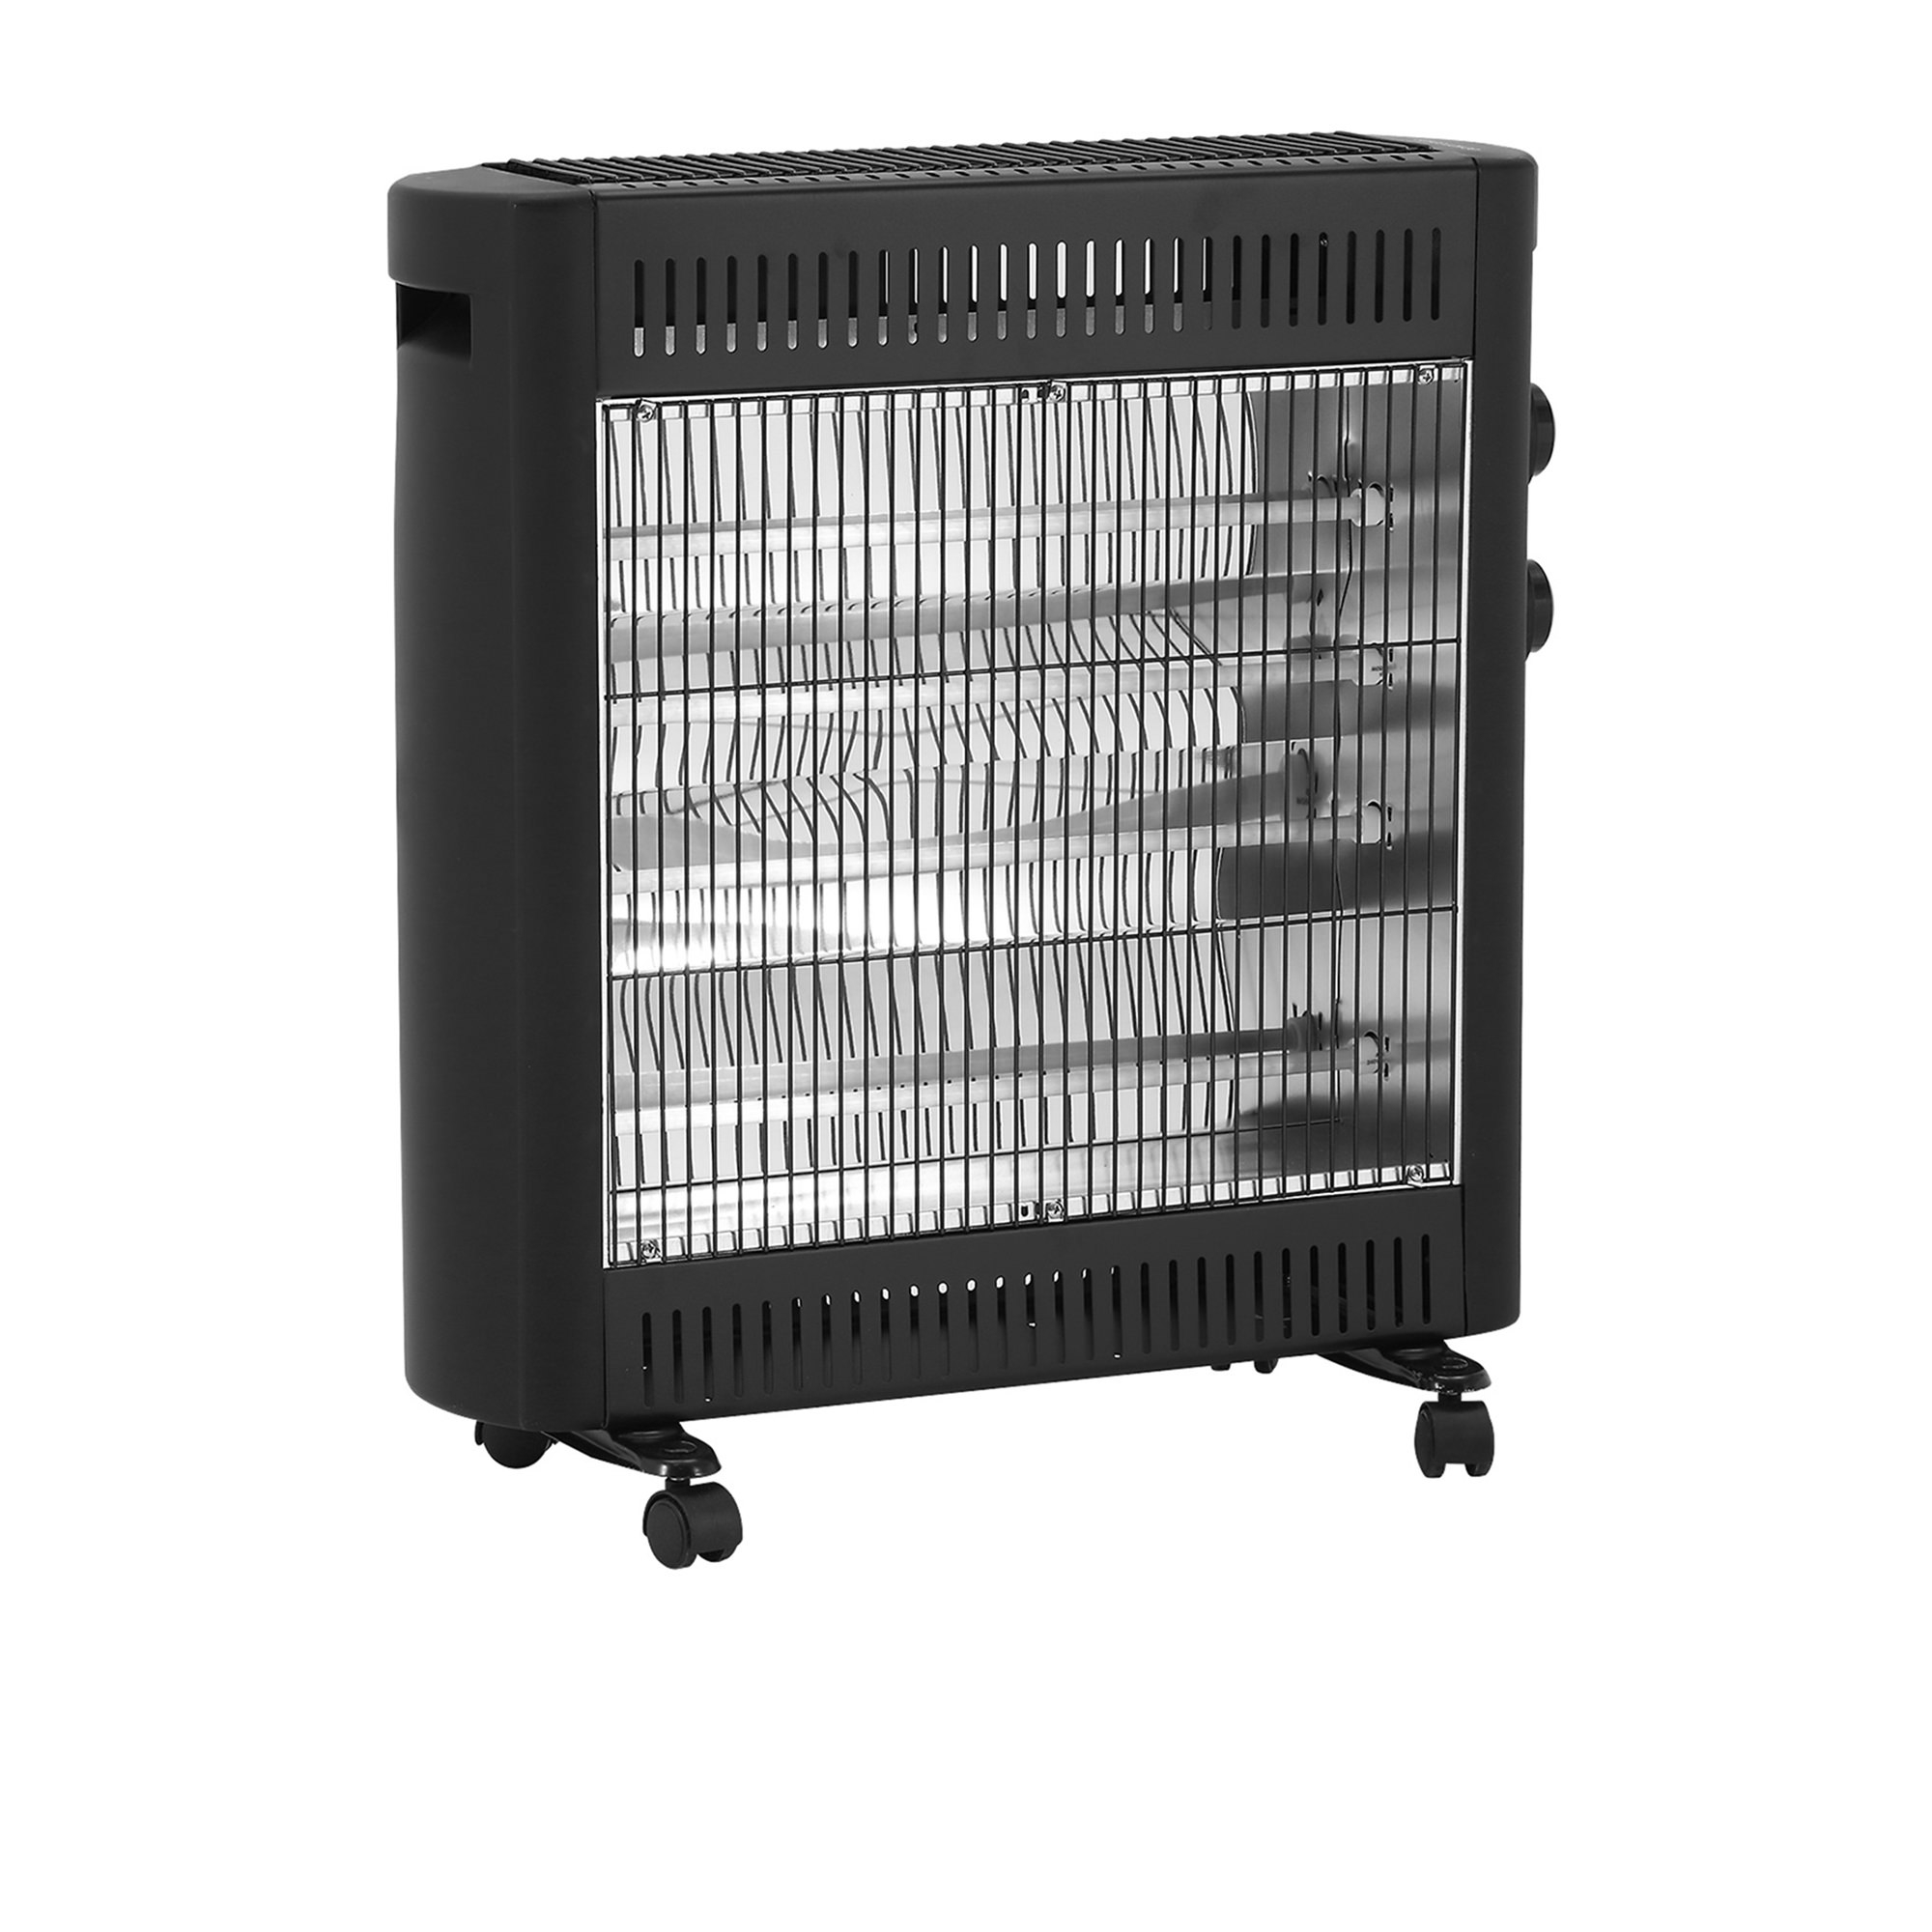 Devanti Infrared Radiant Portable Space Heater 2200W Image 1